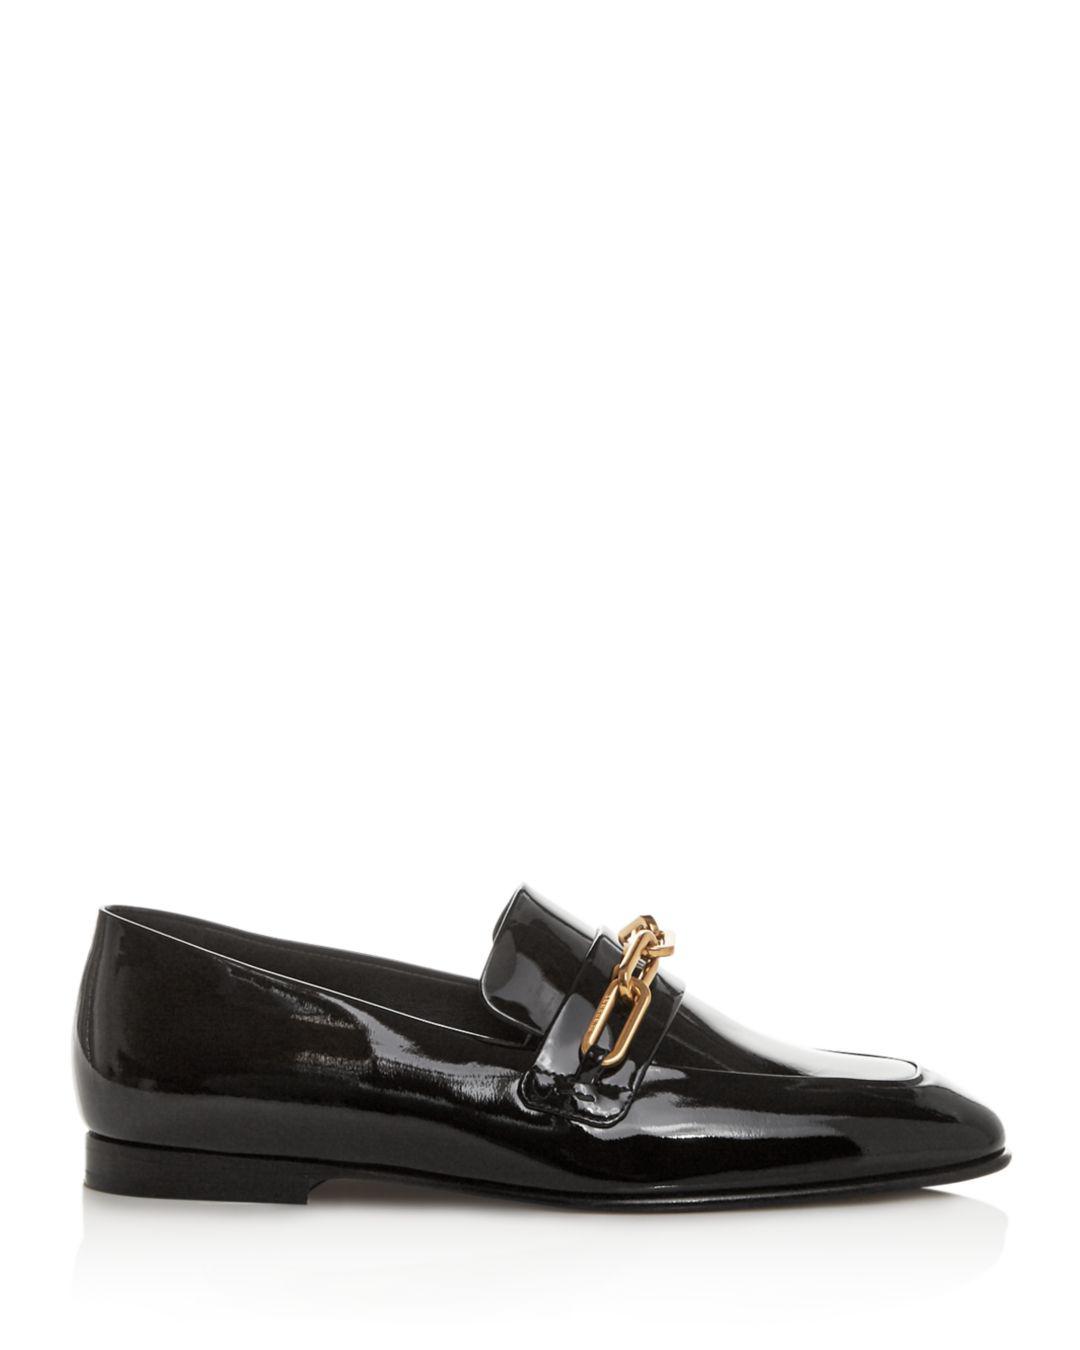 Burberry Women's Chillcot Patent Leather Apron Toe Loafers in Black - Lyst